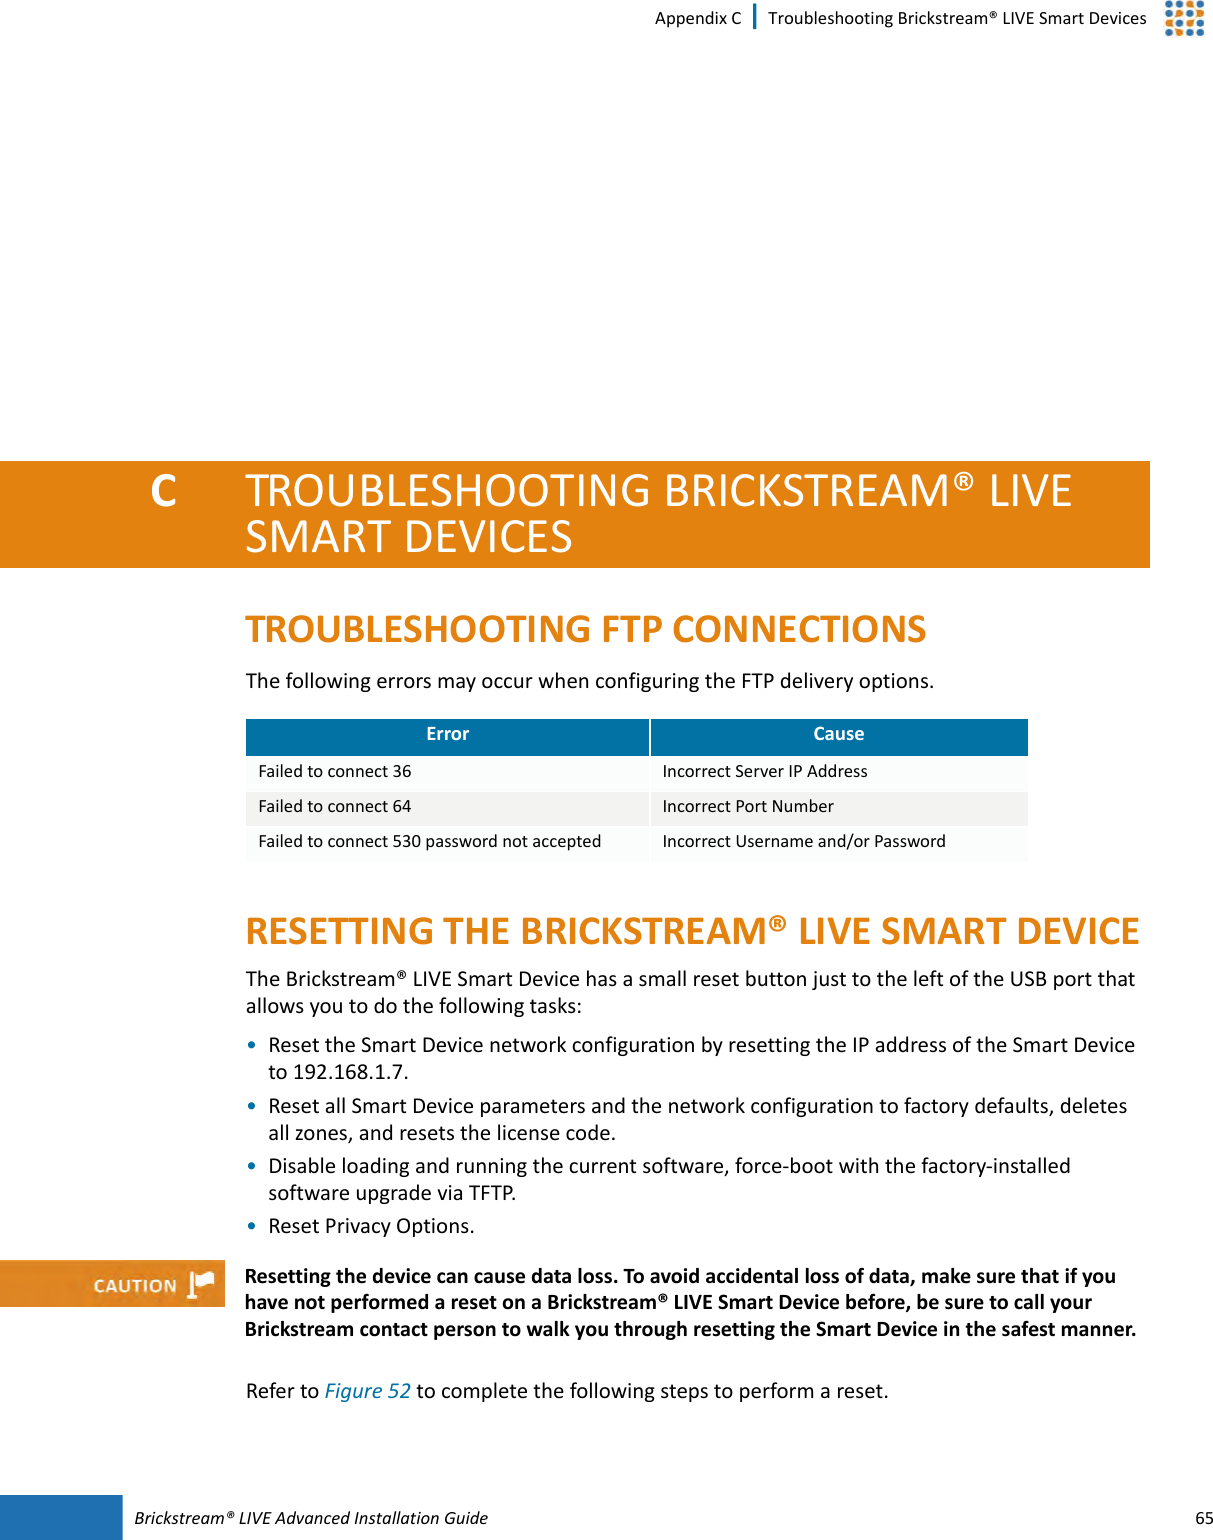 Brickstream®  LIVE Advanced Installation Guide 65Appendix C | Troubleshooting Brickstream® LIVE Smart DevicesCTROUBLESHOOTING BRICKSTREAM®  LIVE SMART  DEVICESTROUBLESHOOTING FTP CONNECTIONSThe following errors may occur when configuring the FTP delivery options. RESETTING THE BRICKSTREAM®  LIVE SMART  DEVICEThe Brickstream® LIVE Smart  Device has a small reset button just to the left of the USB port that allows you to do the following tasks:•Reset the Smart  Device network configuration by resetting the IP address of the Smart Device to 192.168.1.7.•Reset all Smart  Device parameters and the network configuration to factory defaults, deletes all zones, and resets the license code.•Disable loading and running the current software, force-boot with the factory-installed software upgrade via TFTP.•Reset Privacy Options.Refer to Figure 52 to complete the following steps to perform a reset.Error CauseFailed to connect 36  Incorrect Server IP AddressFailed to connect 64  Incorrect Port NumberFailed to connect 530 password not accepted  Incorrect Username and/or PasswordResetting the device can cause data loss. To avoid accidental loss of data, make sure that if you have not performed a reset on a Brickstream® LIVE Smart  Device before, be sure to call your Brickstream contact person to walk you through resetting the Smart  Device in the safest manner.